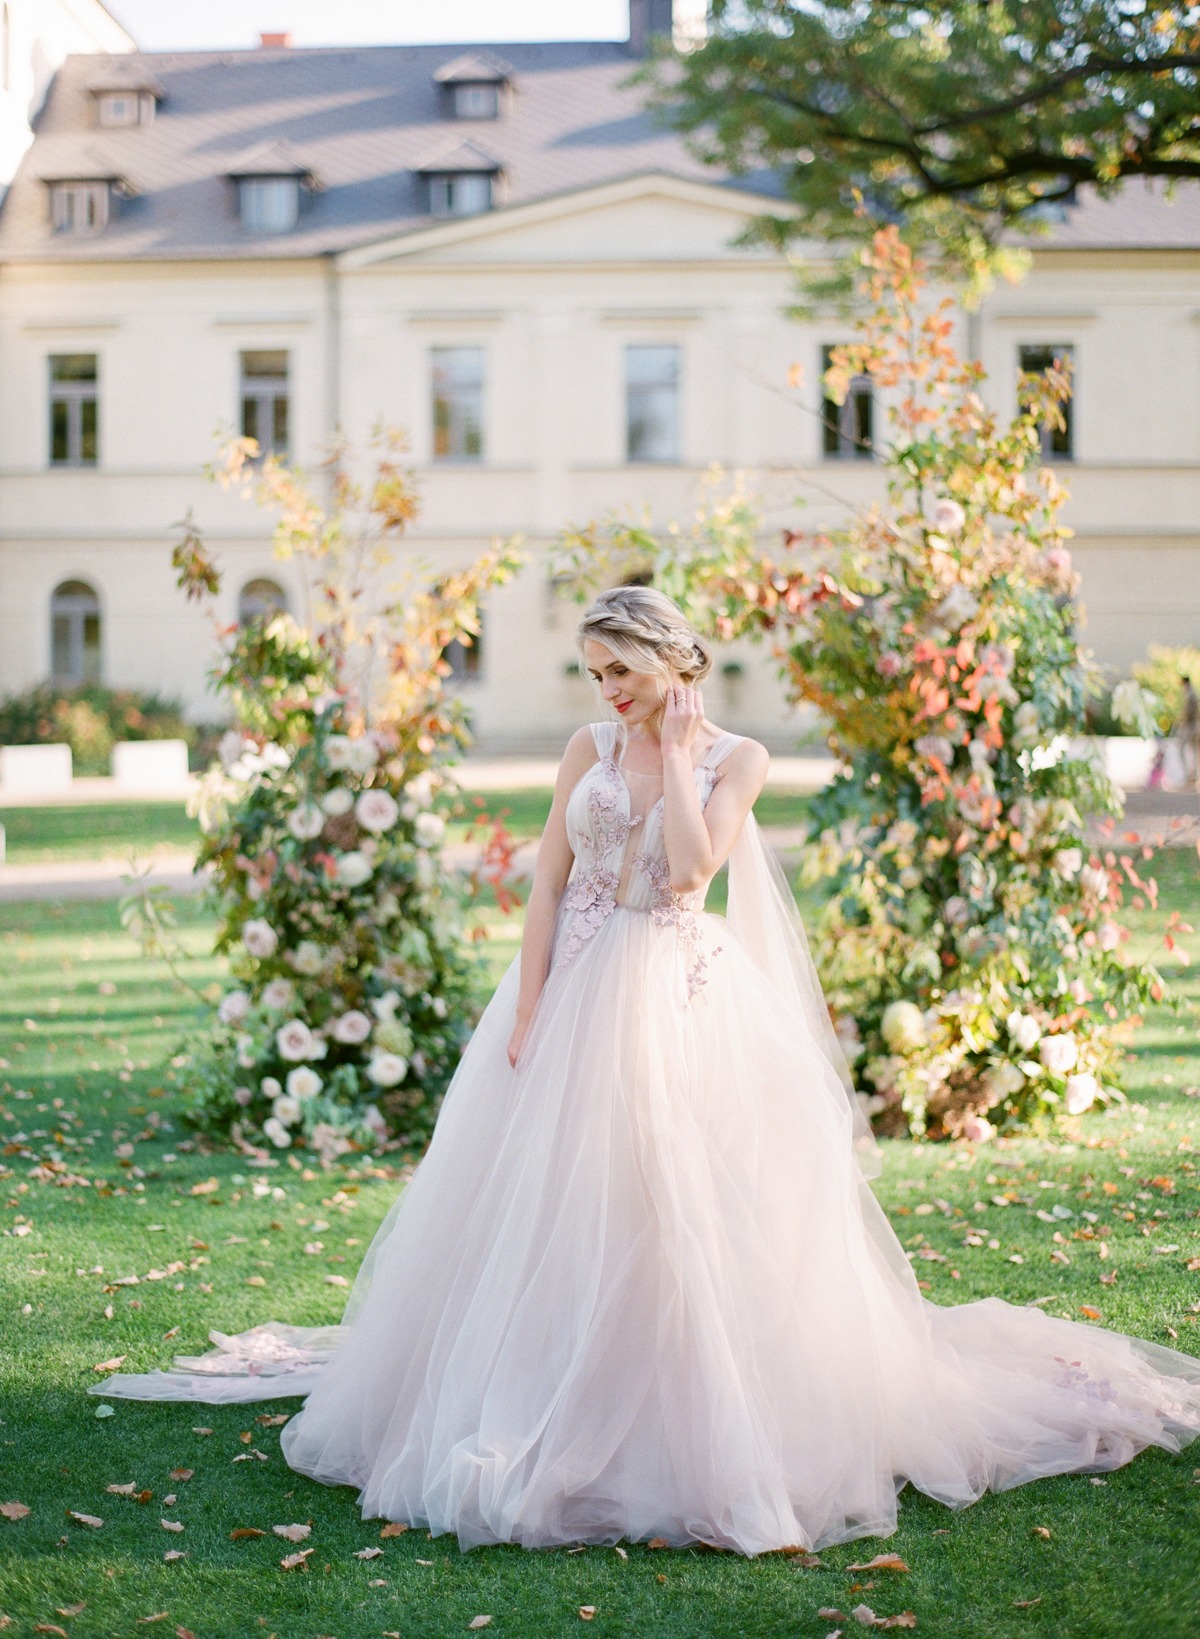 Blush tulle wedding dress by White Day